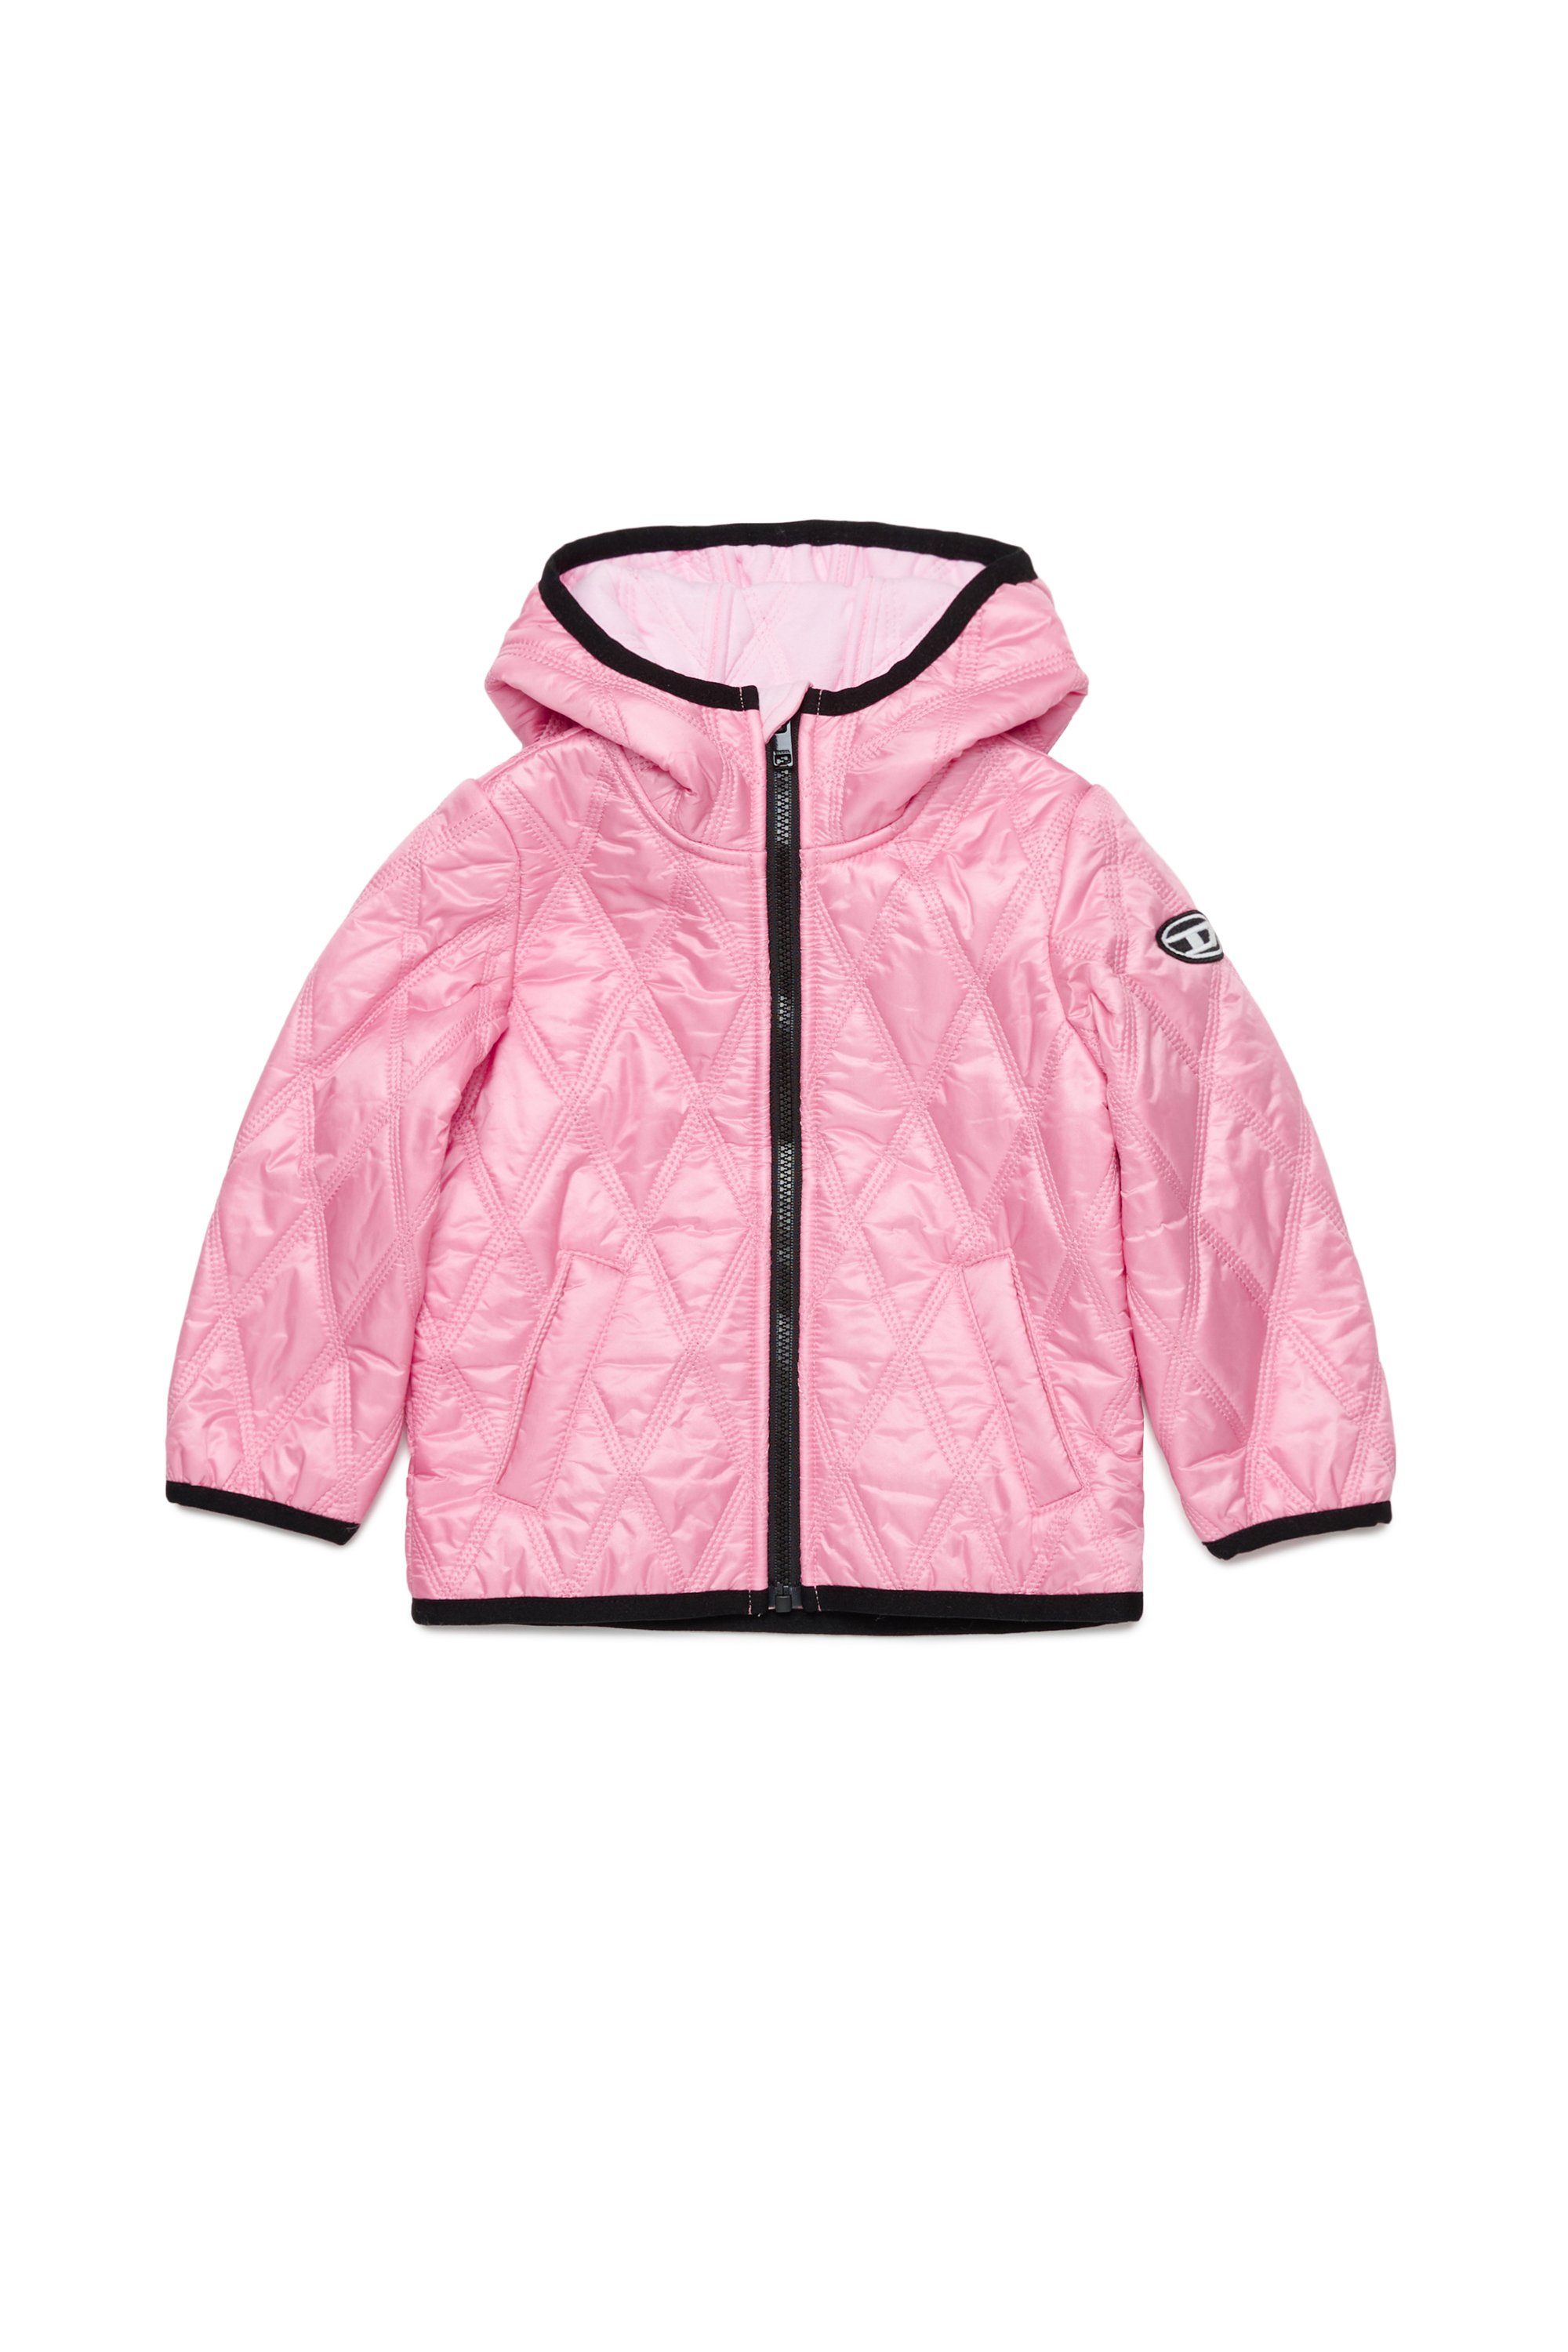 Diesel - JFOKKERB, Unisex Giacca trapuntata con cappuccio e patch Oval D in Rosa - Image 1